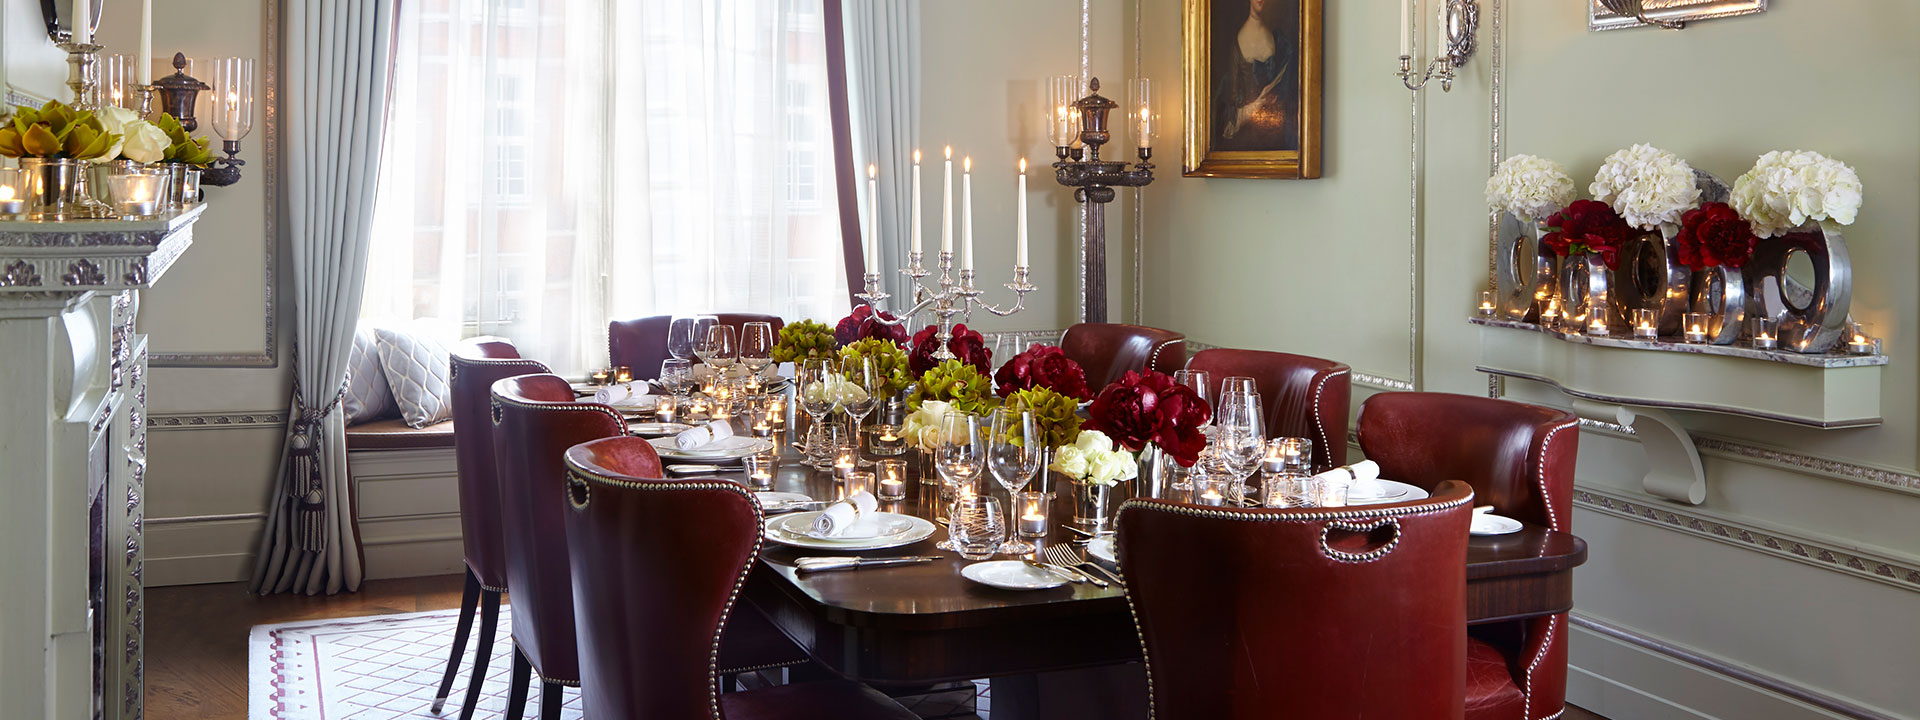 Long table with fine cutlery, long candles and red seats next to a large window at the Georgian Room.